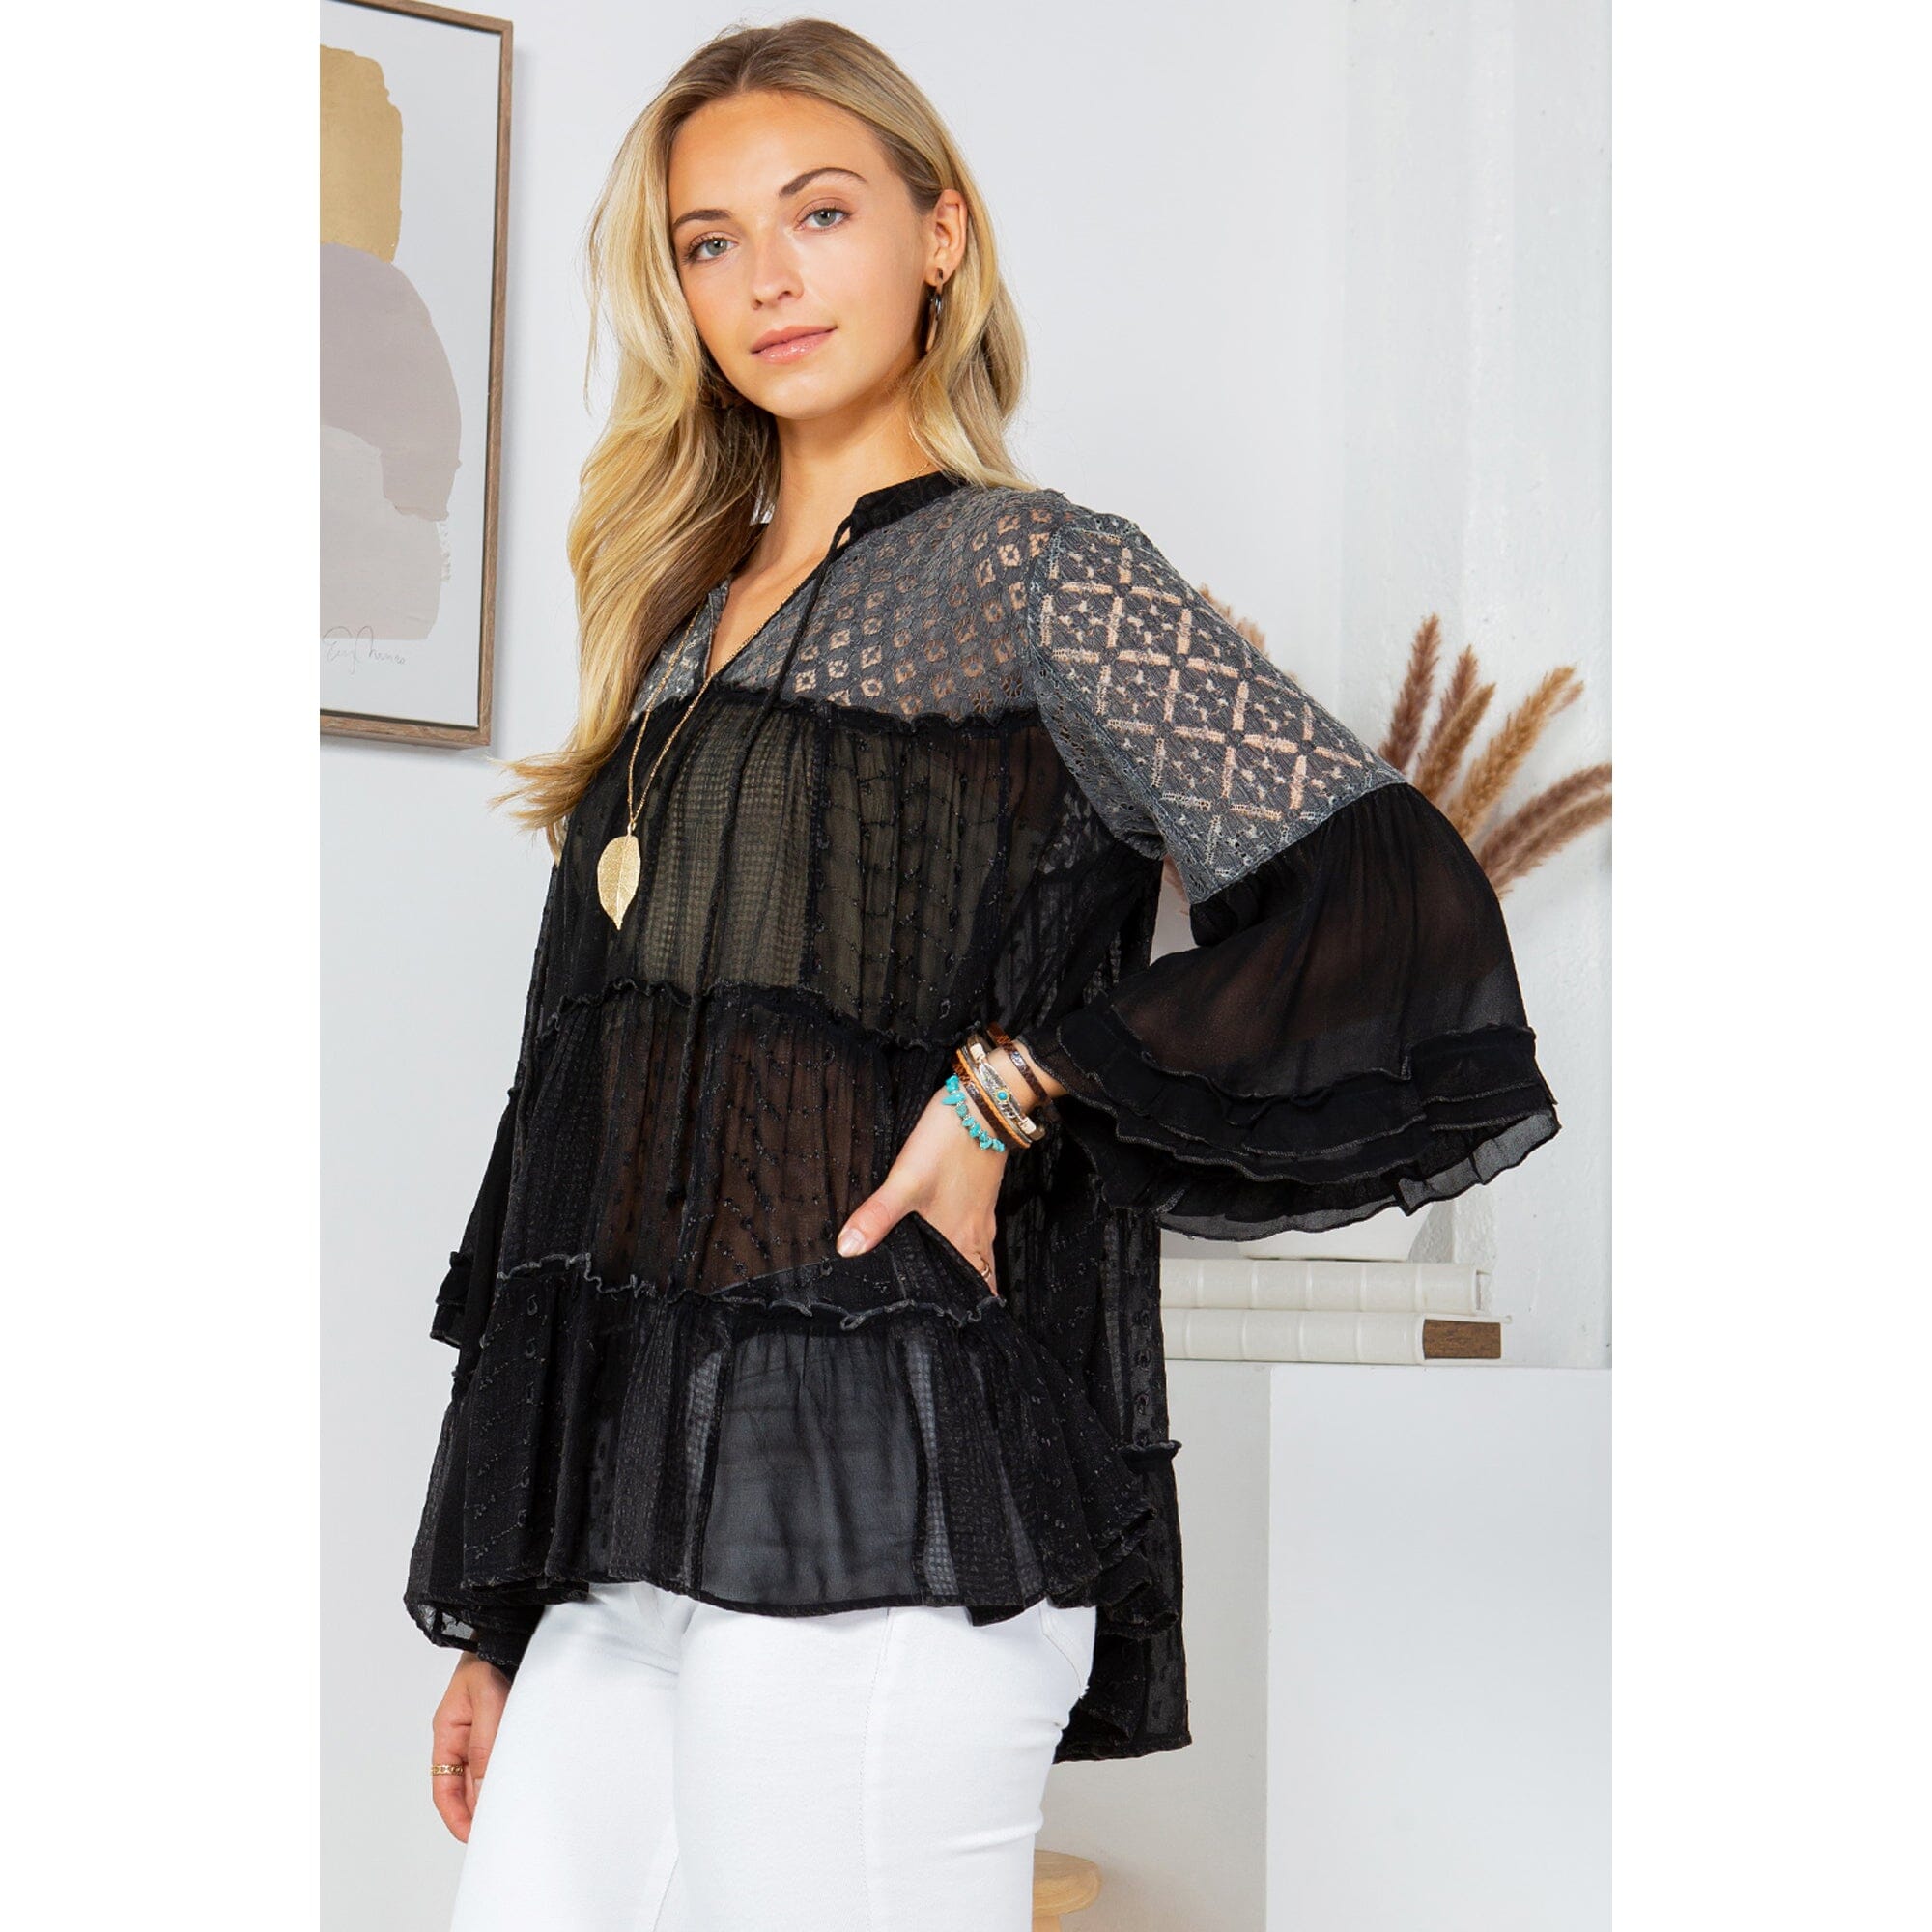 LOOSE FIT PATCHWORK RUFFLED TOP Top FashionWear Collection S Charcoal 